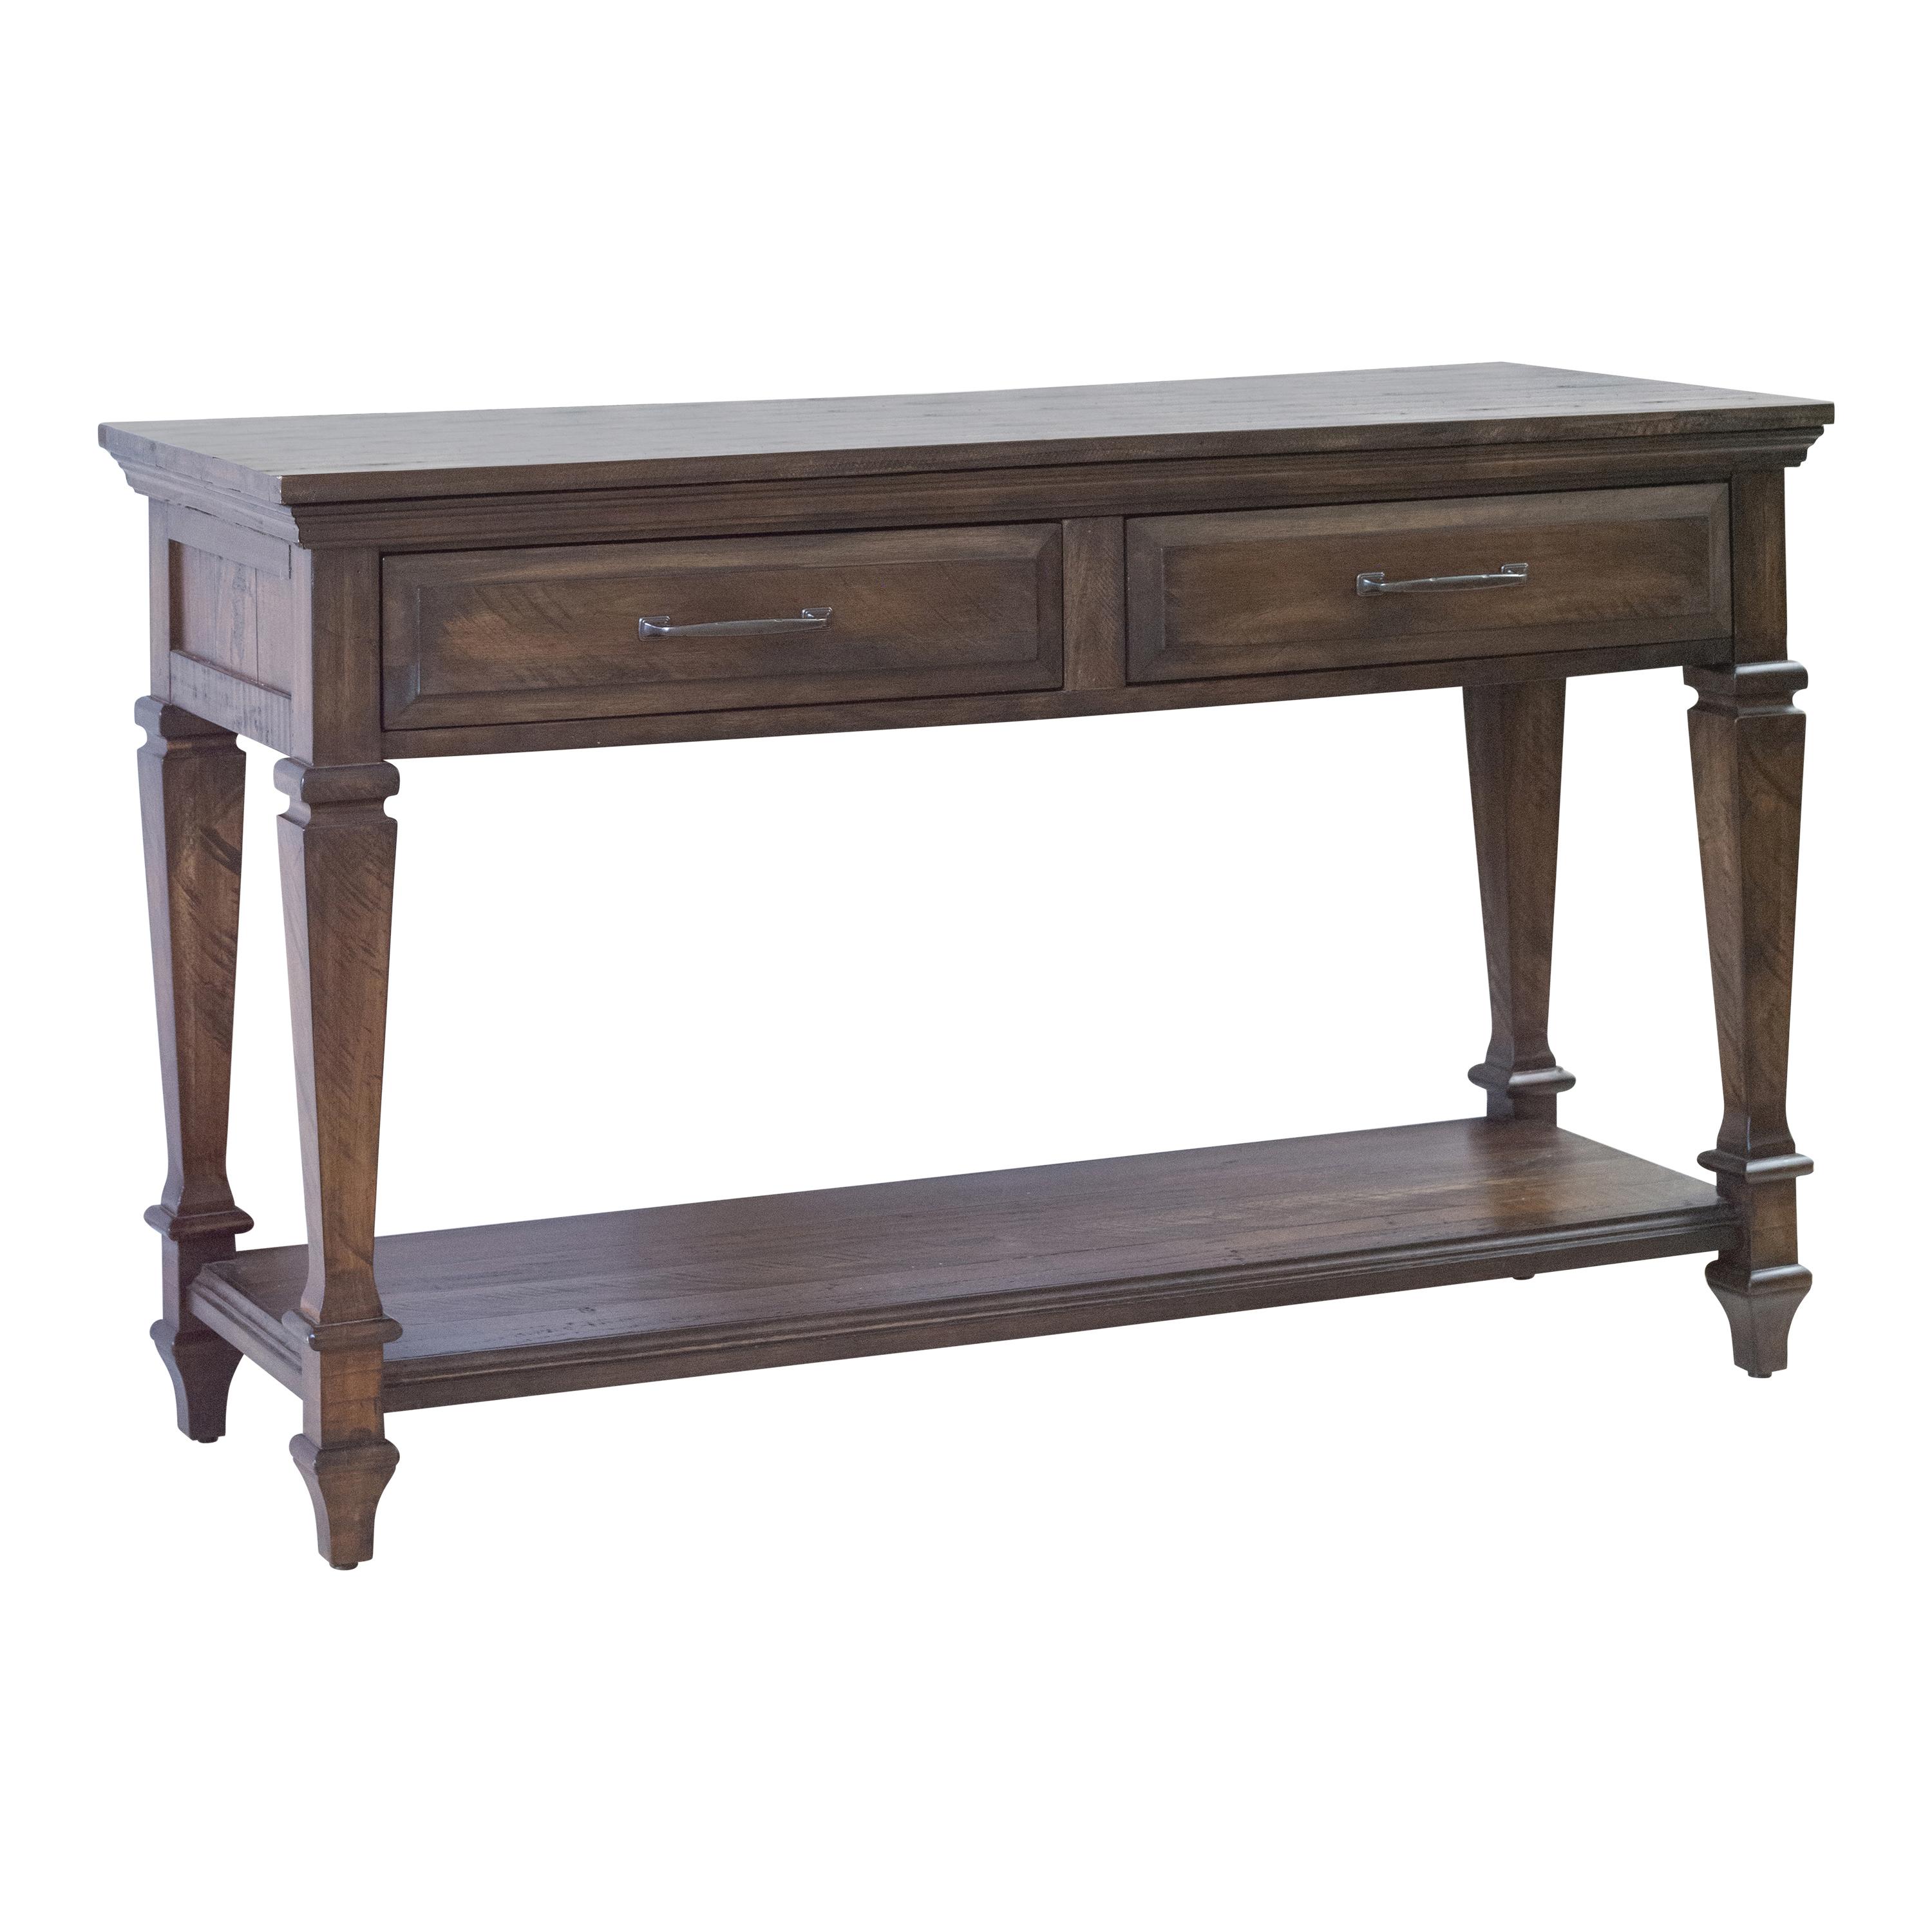 Traditional Sofa Table 724059 724059 in Brown 